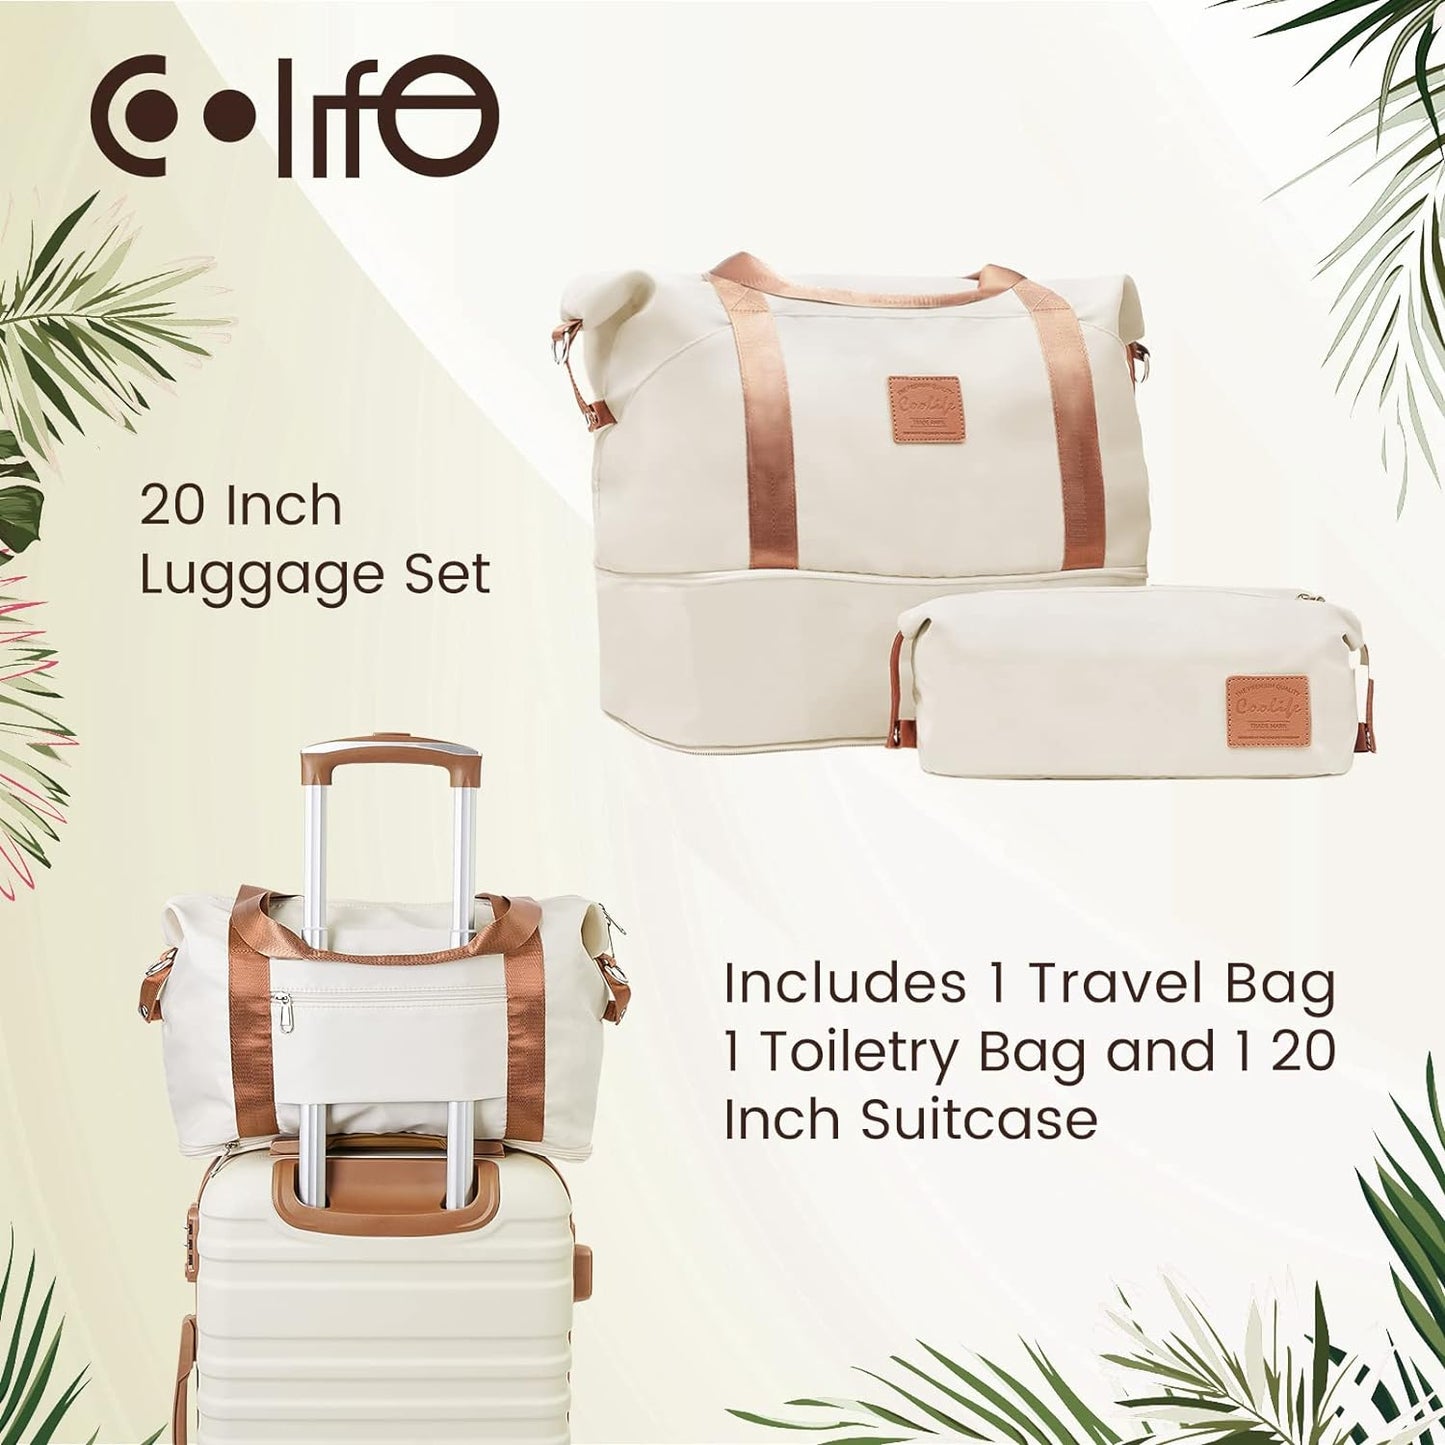 COOLIFE Suitcase Trolley Carry On Hand Cabin Luggage Hard Shell Travel Bag Lightweight with TSA Lock,The Suitcase Included 1pcs Travel Bag and 1pcs Toiletry Bag (White/Brown, 24 Inch Luggage Set)